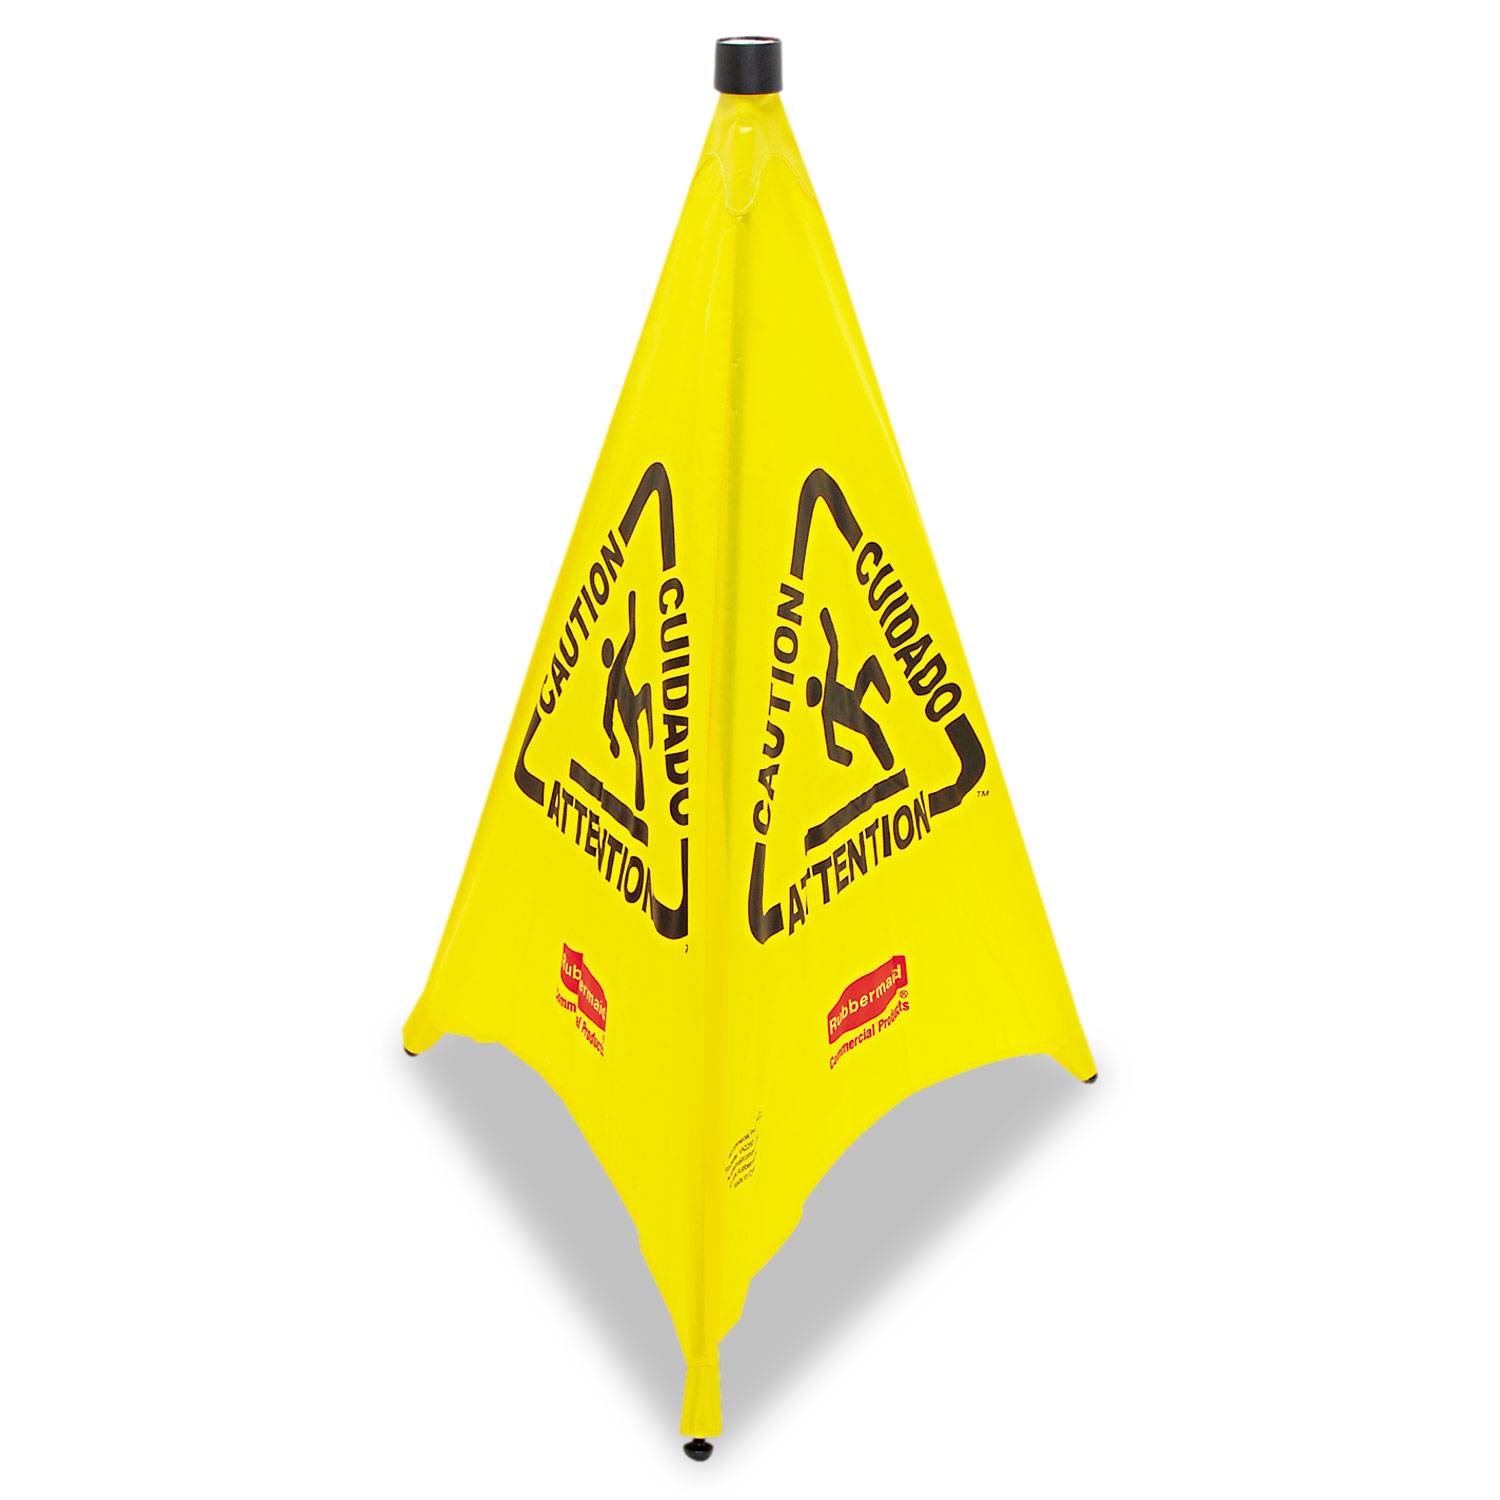 Wet Floor & Caution Multilingual Safety Warning Cone Sign Visibility Sign 